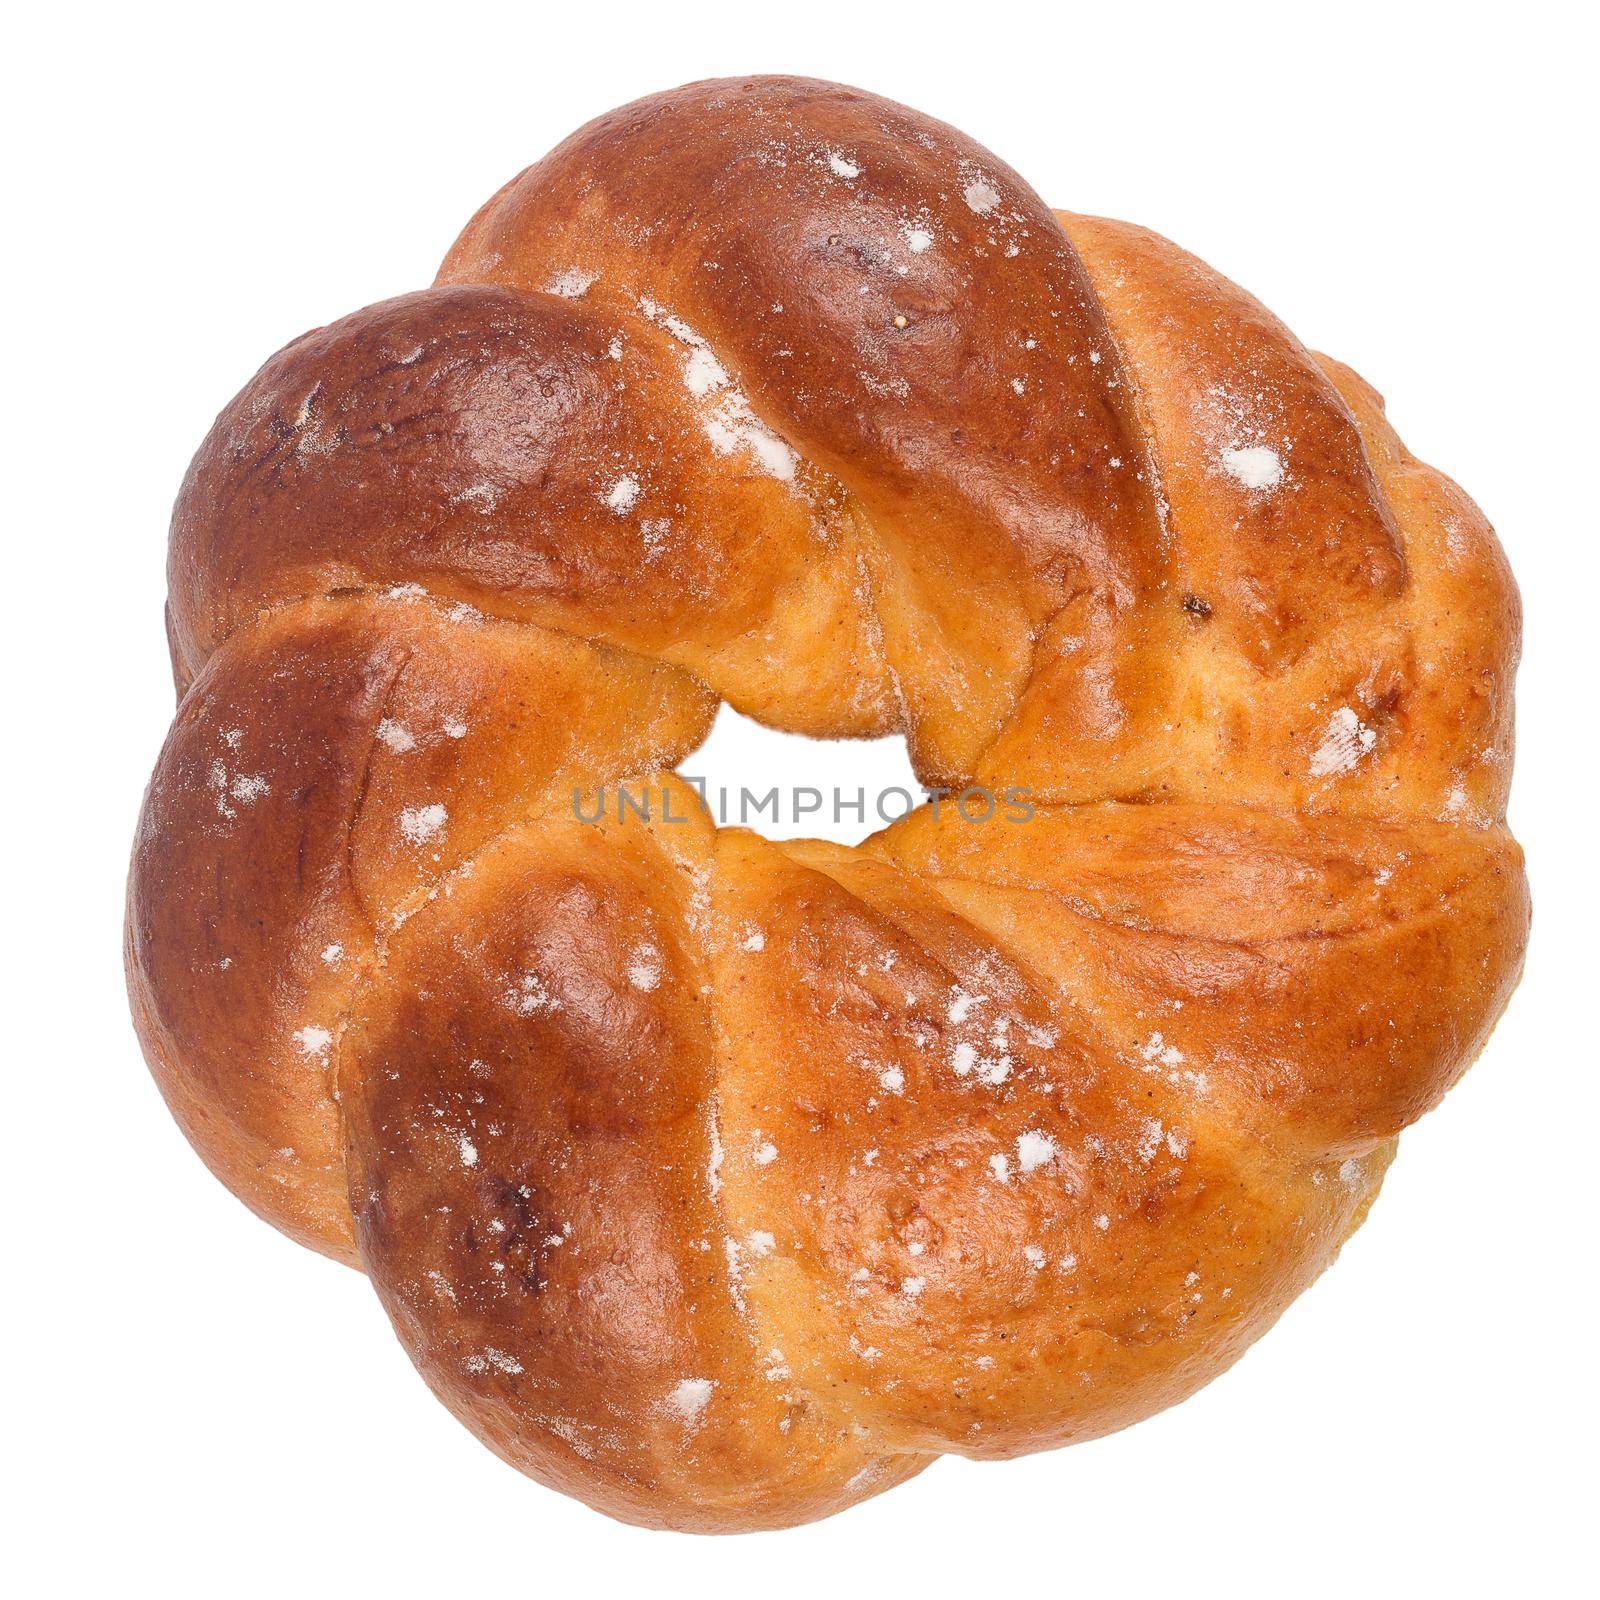 sweet bread isolated on white background.